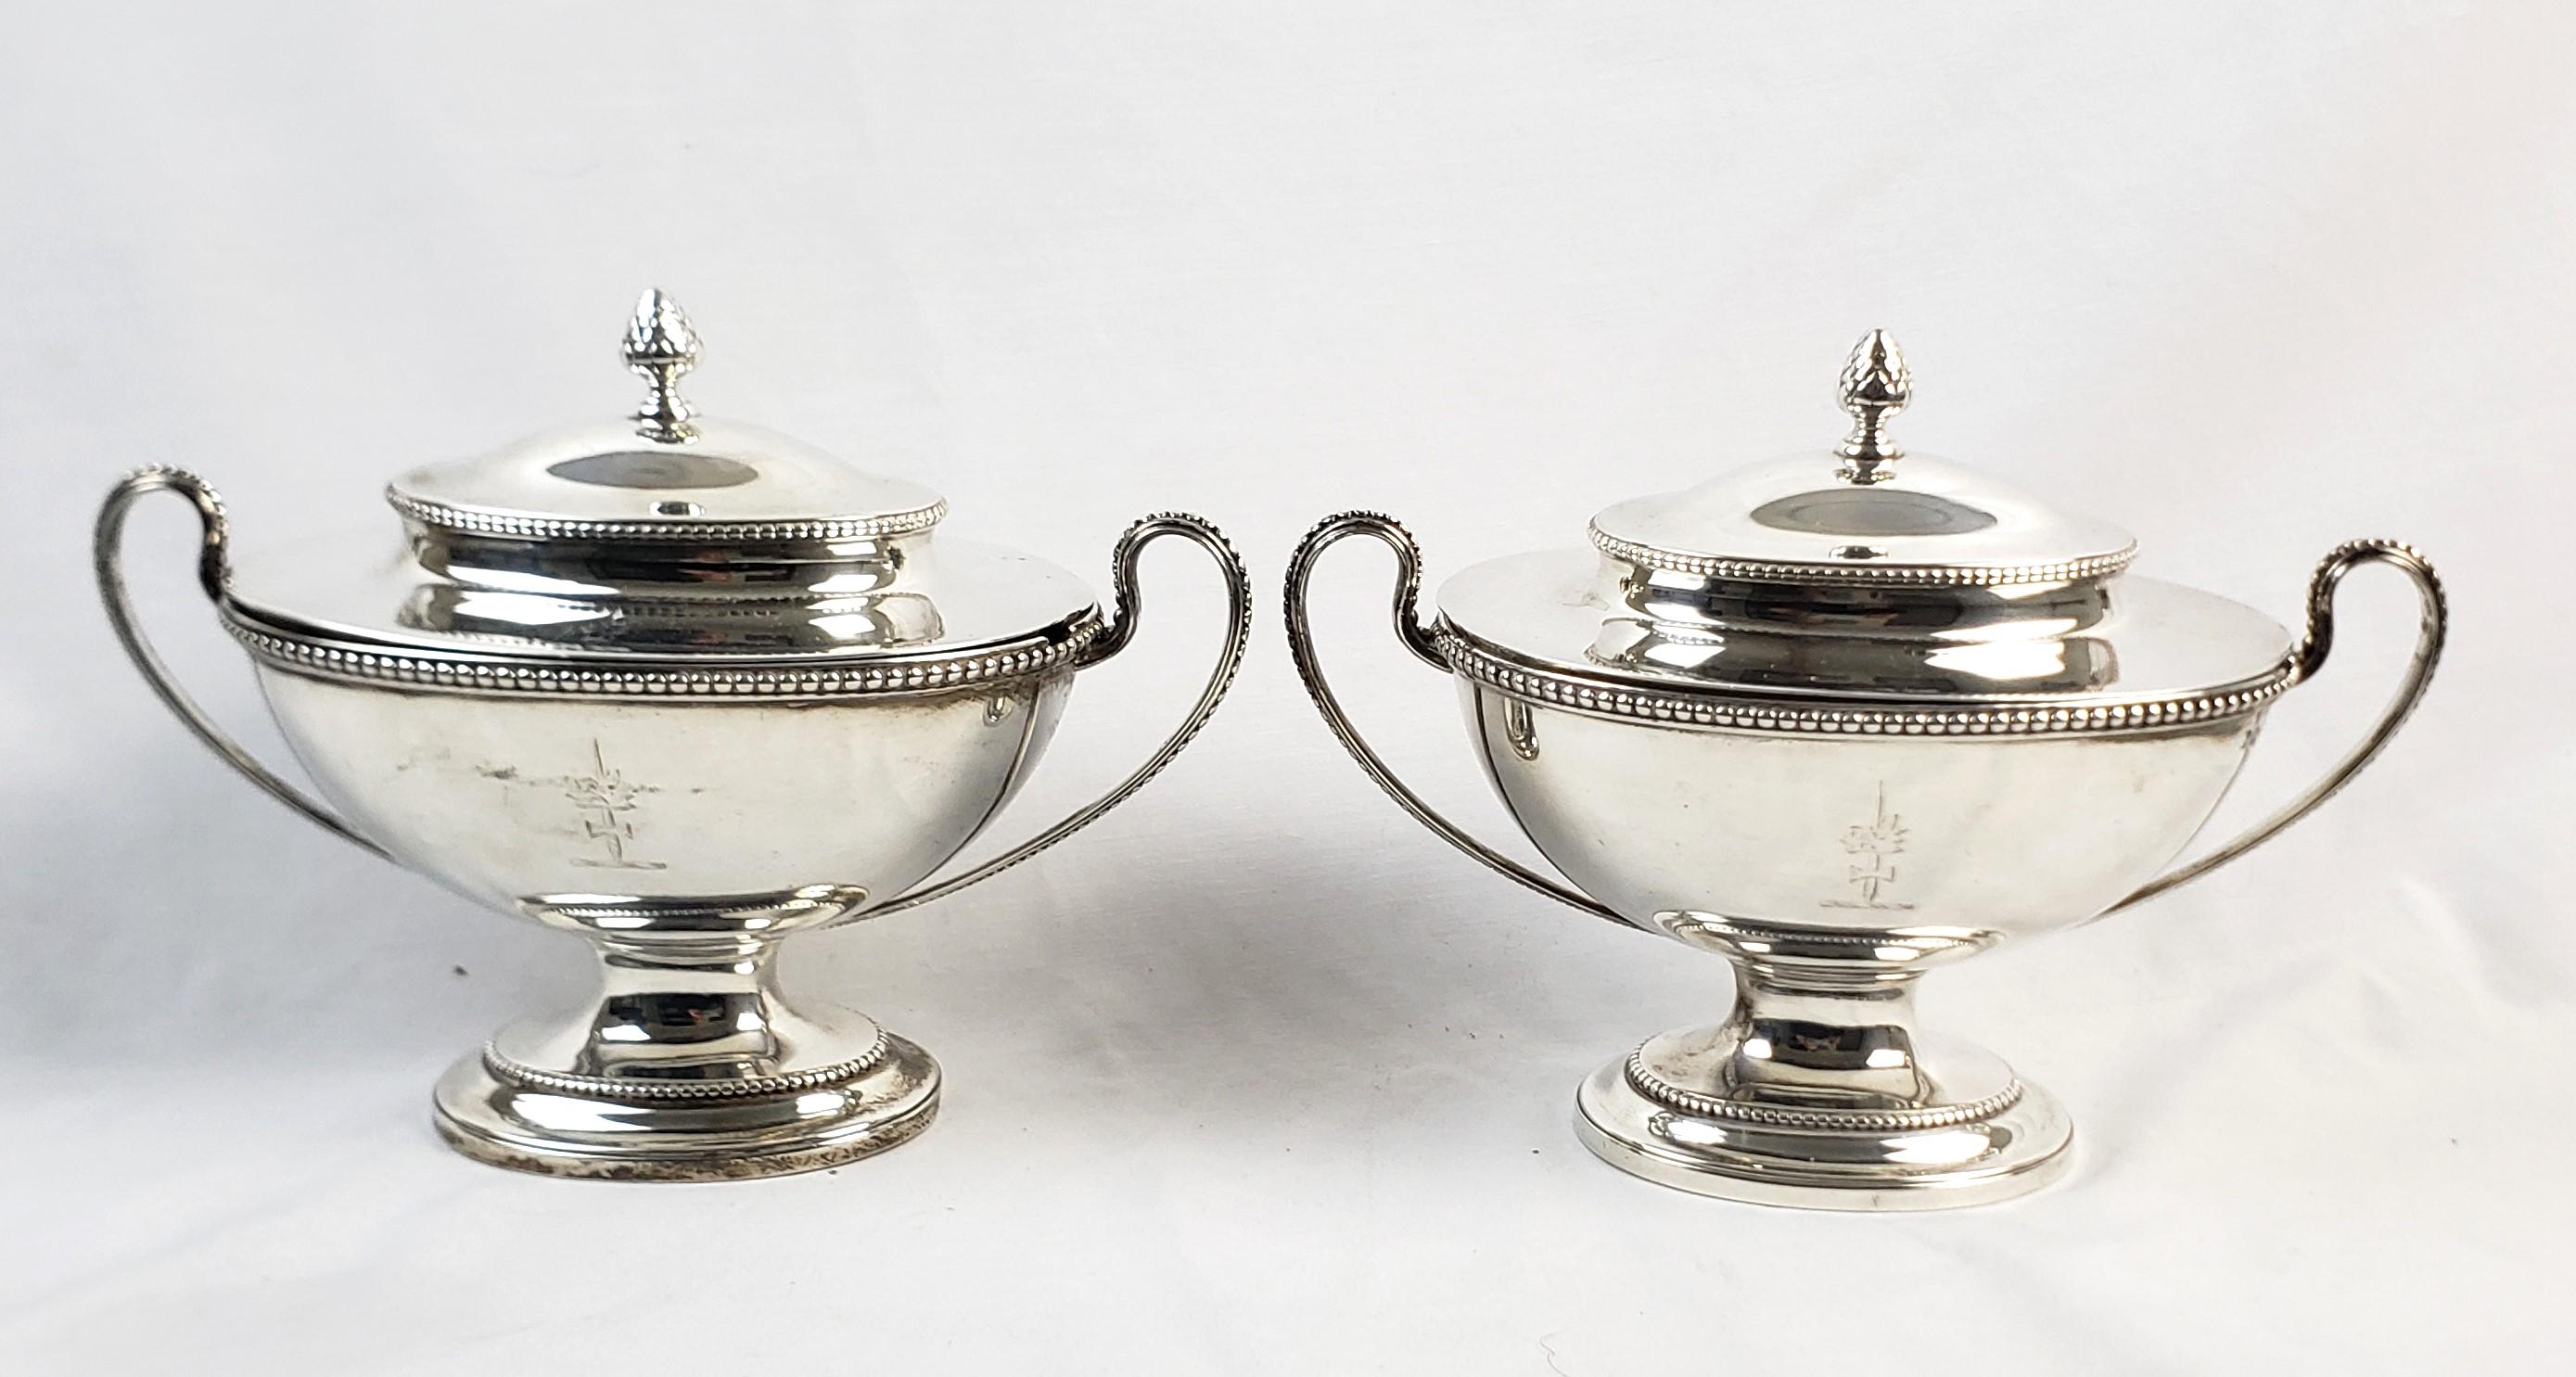 This pair of antique covered sauce tureens are hallmarked by an unknown maker, but originated from England and date to approximately 1820 and done in the period Georgian style. The tureens are composed of sterling silver and have artichoke finials